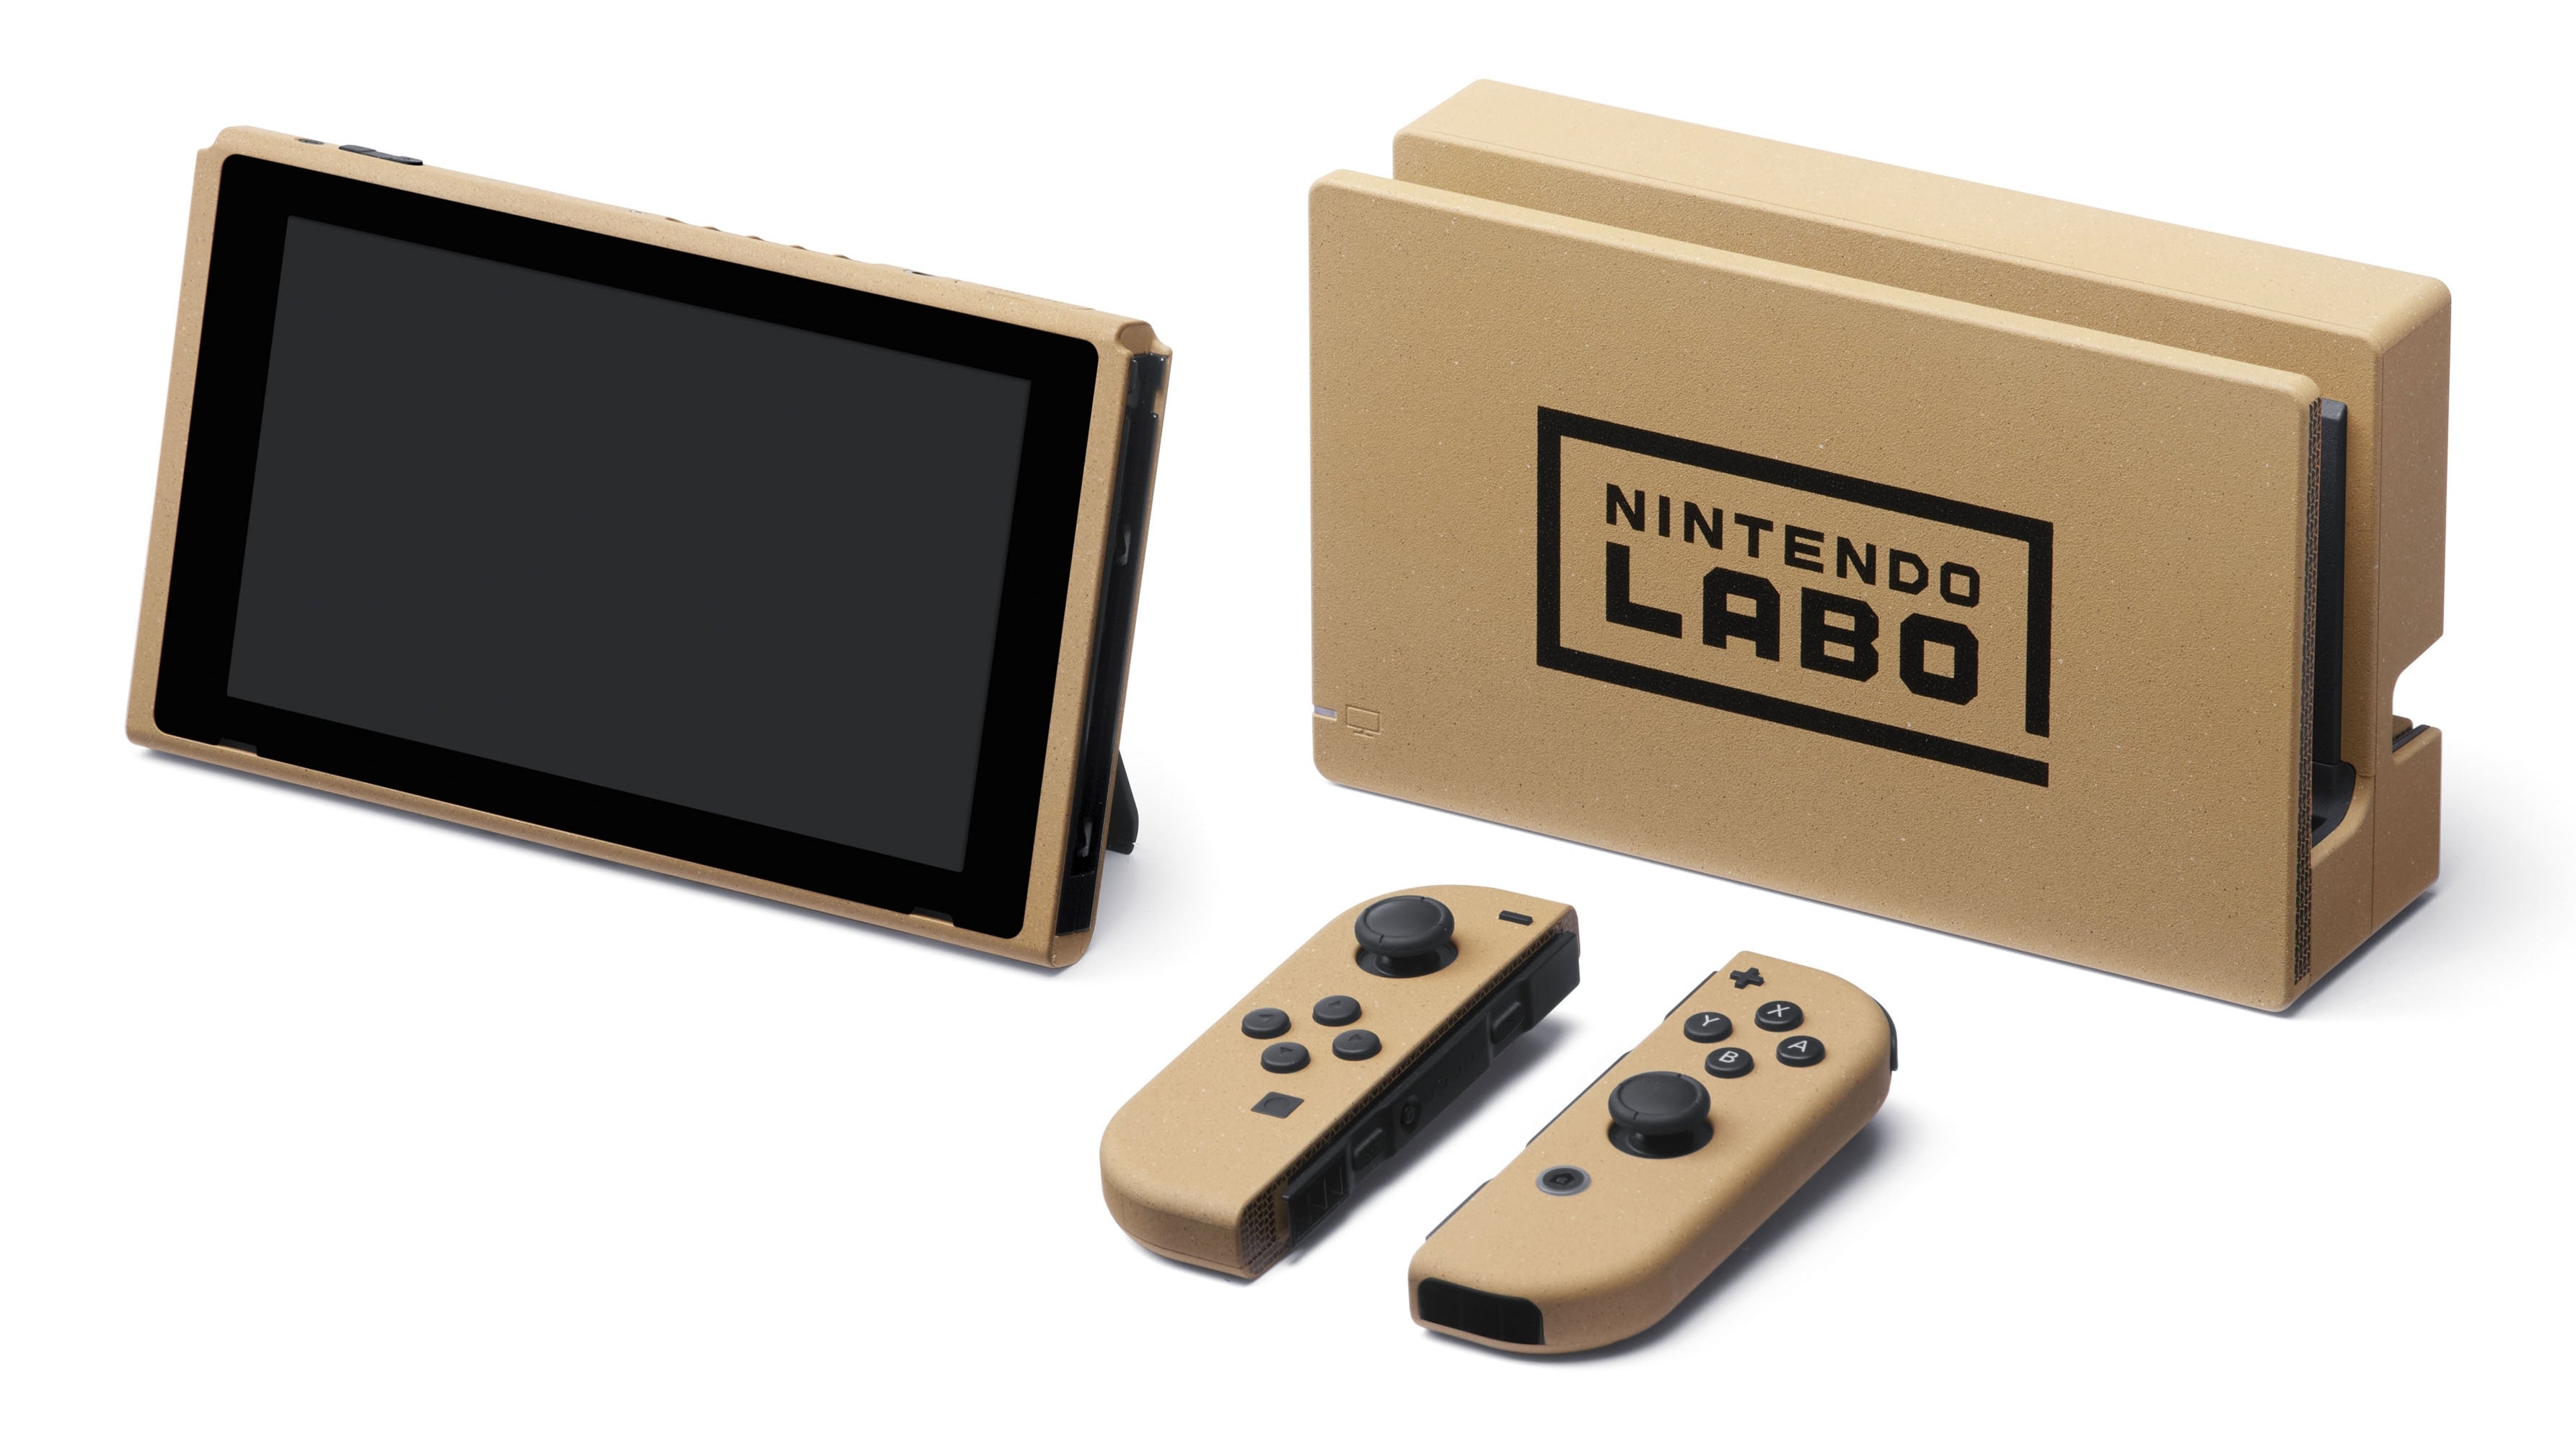 Image for Just look at Nintendo's official cardboard-themed Nintendo Switch